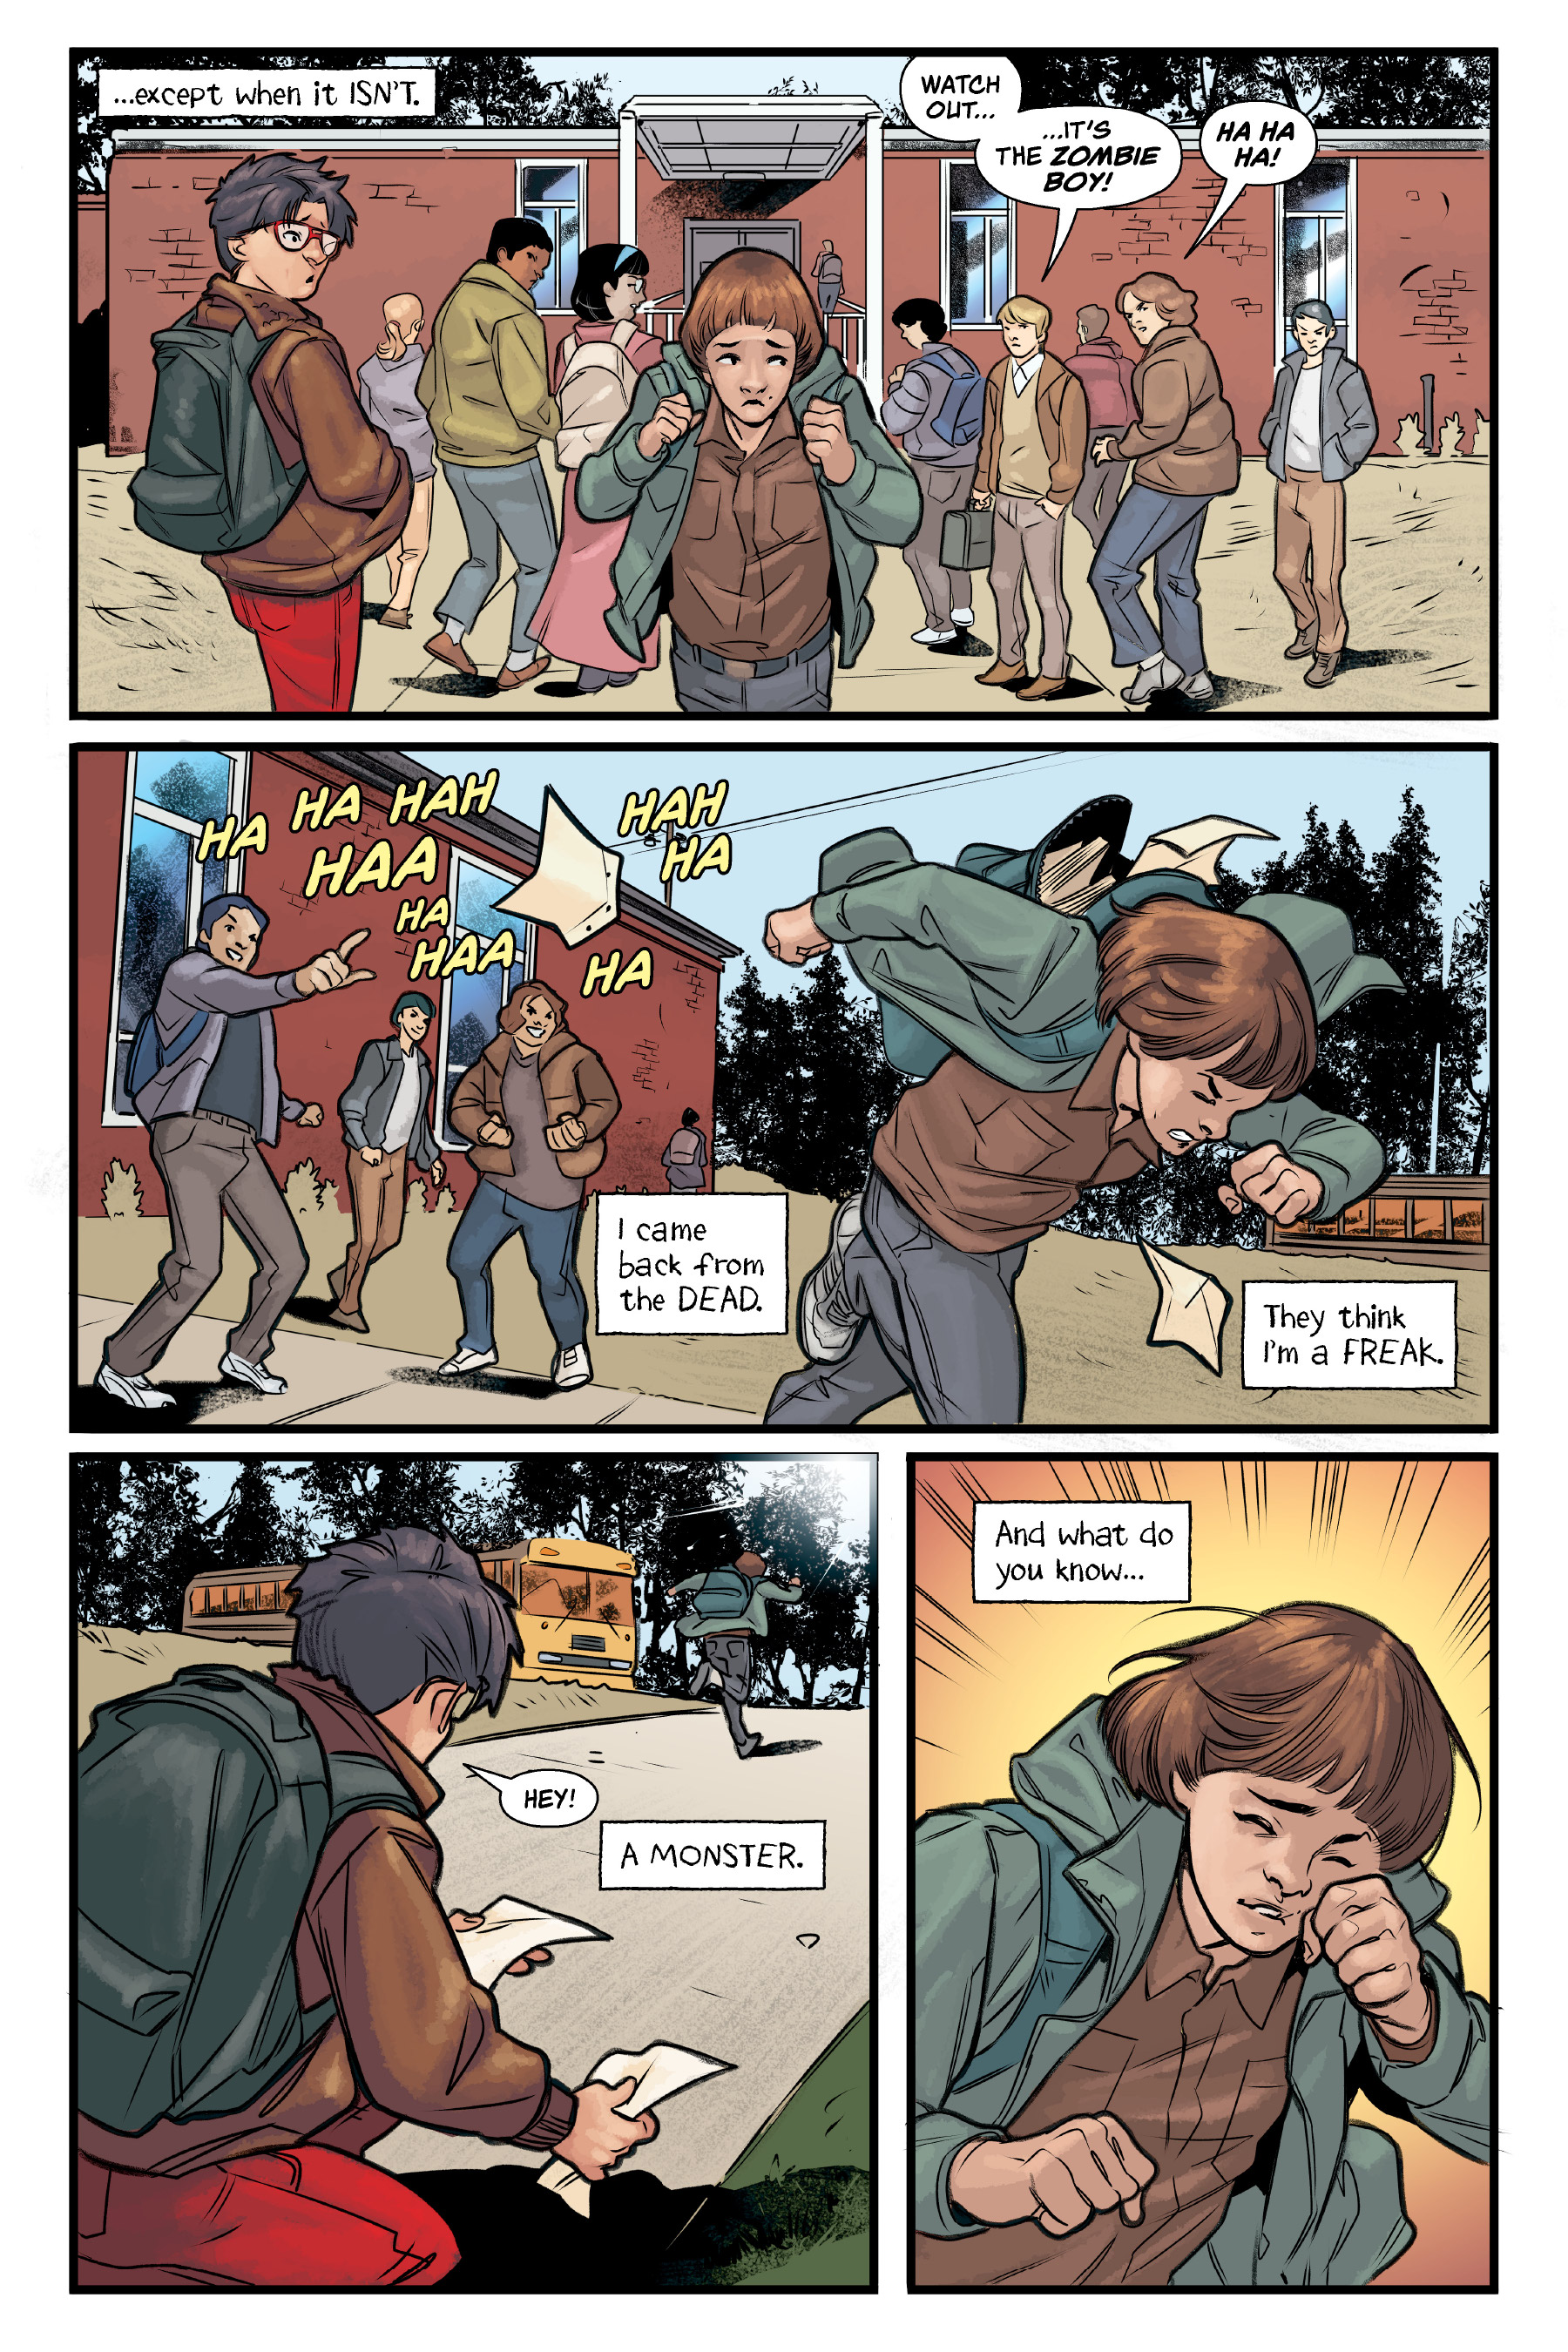 Read online Stranger Things: Zombie Boys comic -  Issue # TPB - 9